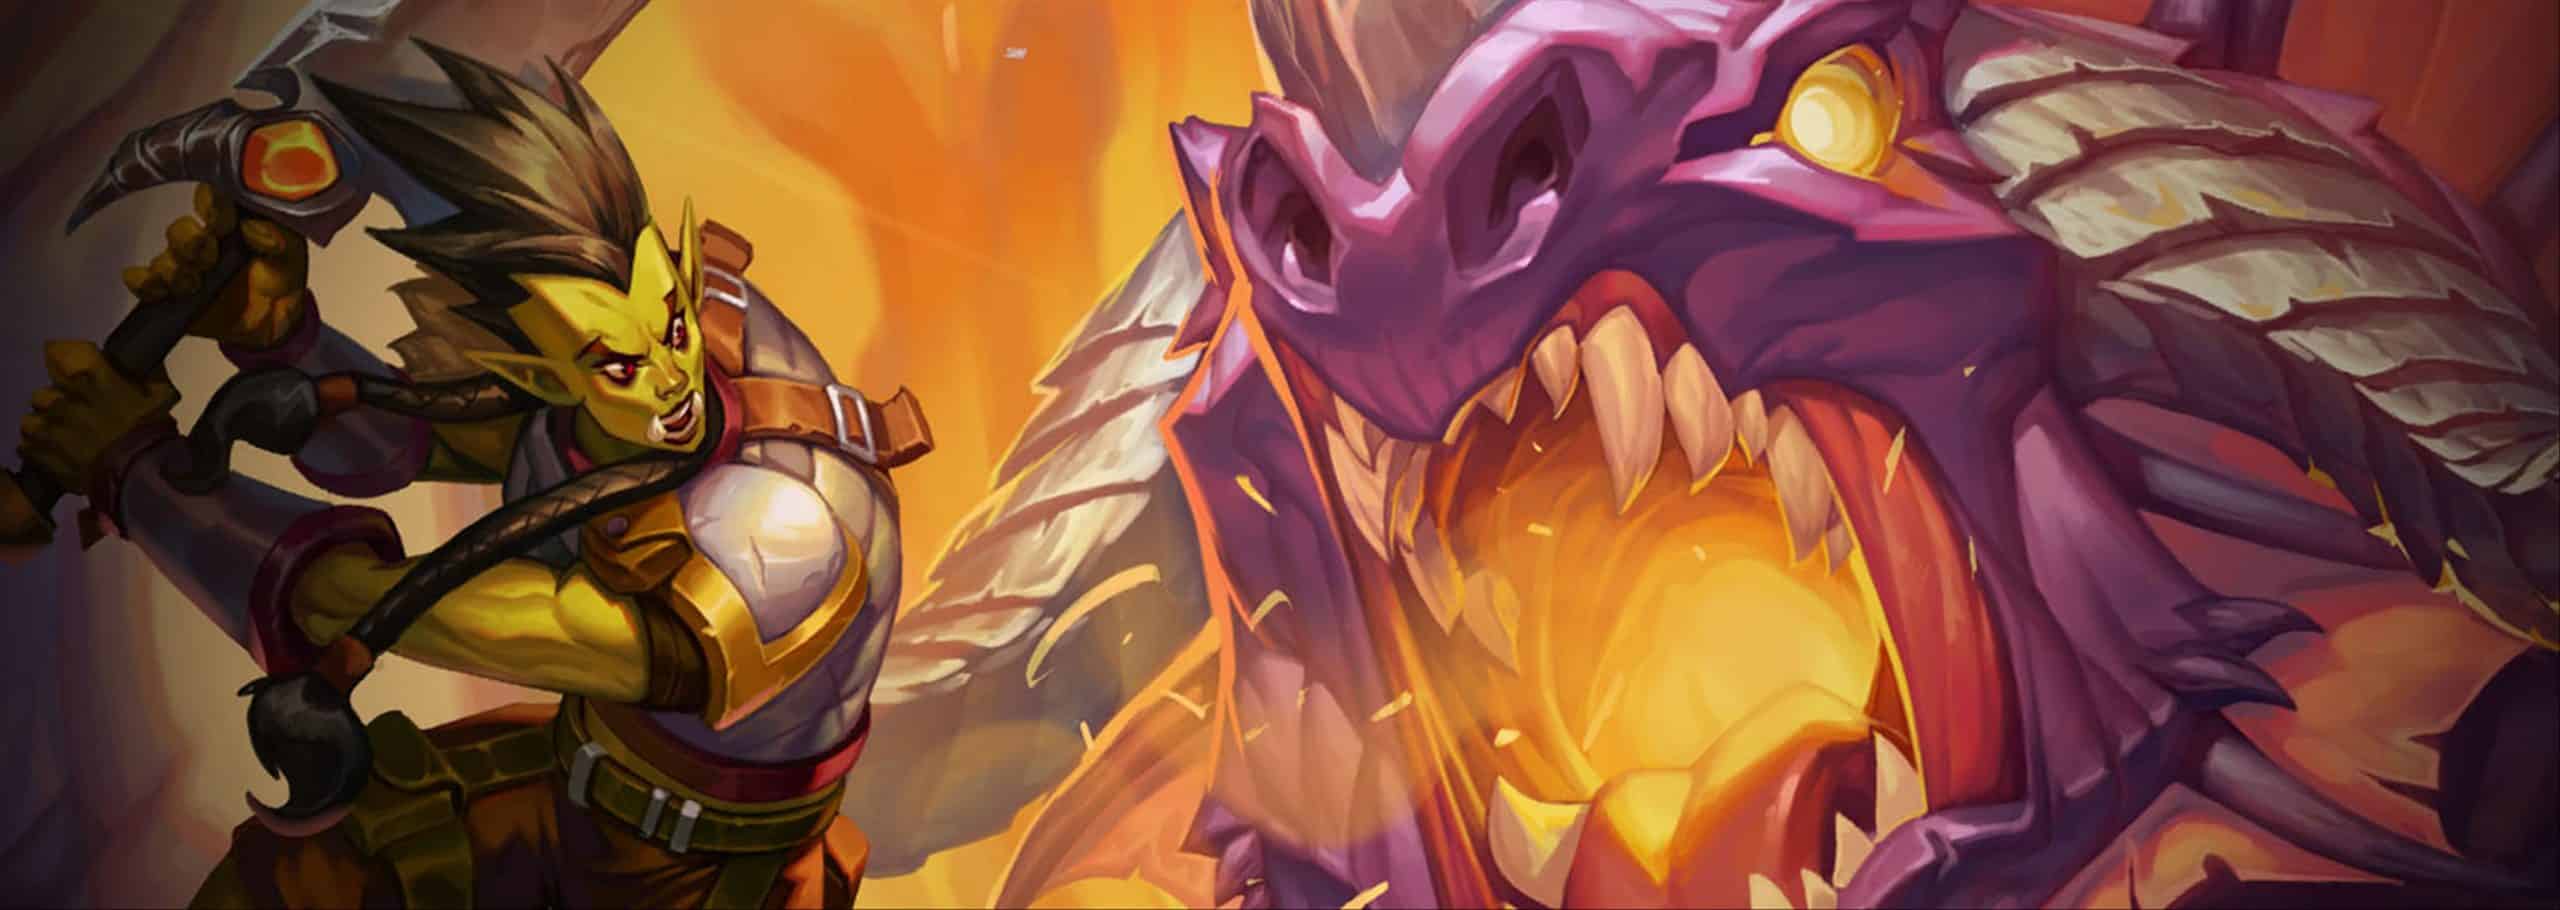 Hearthstone’s Onyxia’s Lair Mini-Set is here, adding 35 new cards into the table